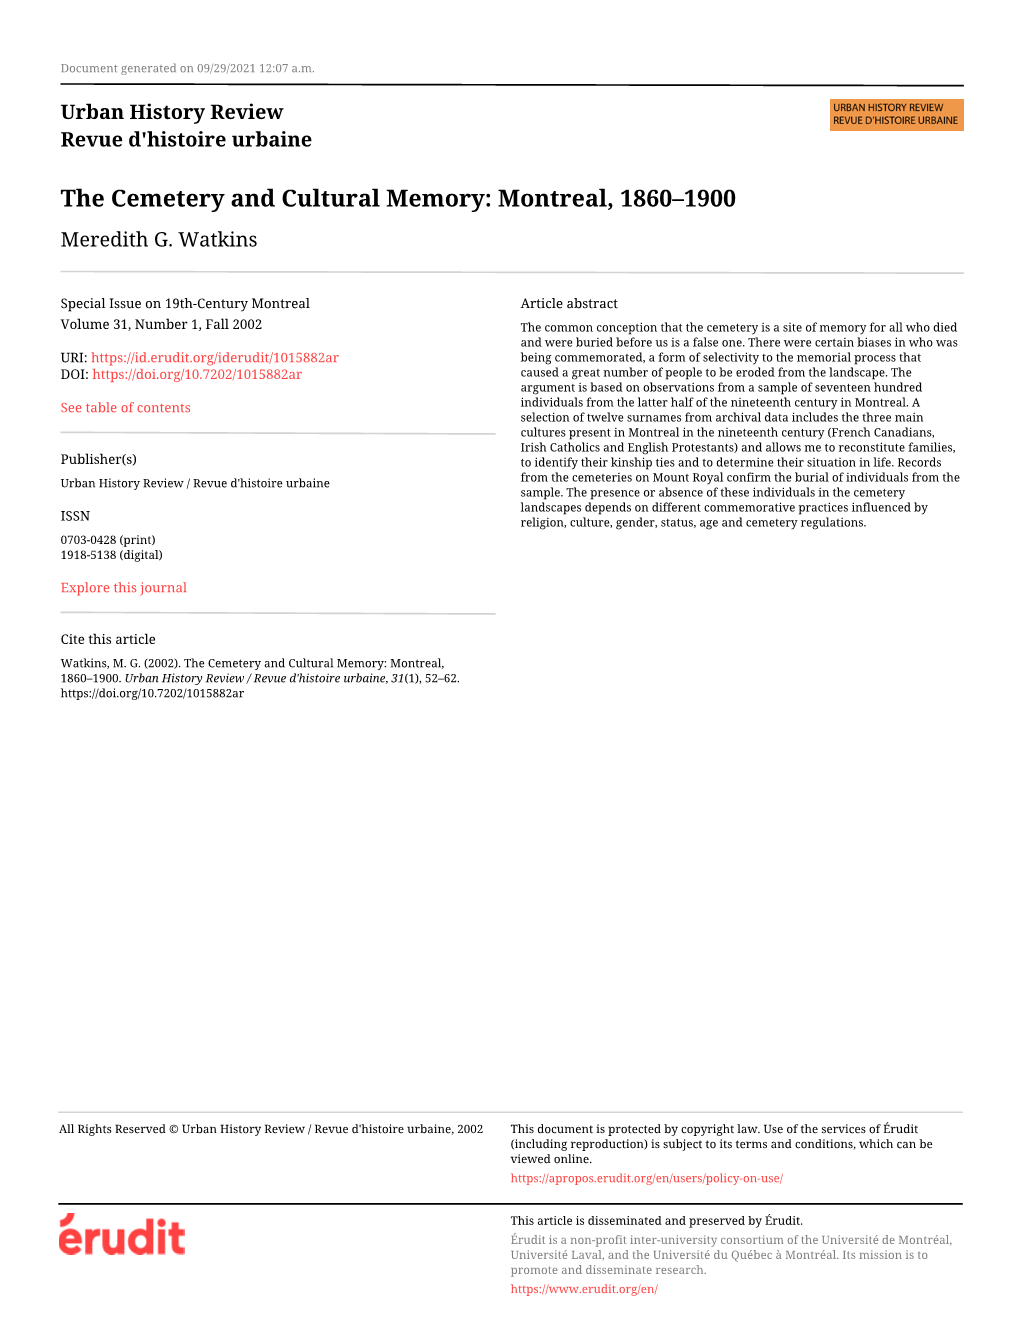 ﻿The Cemetery and Cultural Memory: Montreal, 1860–1900